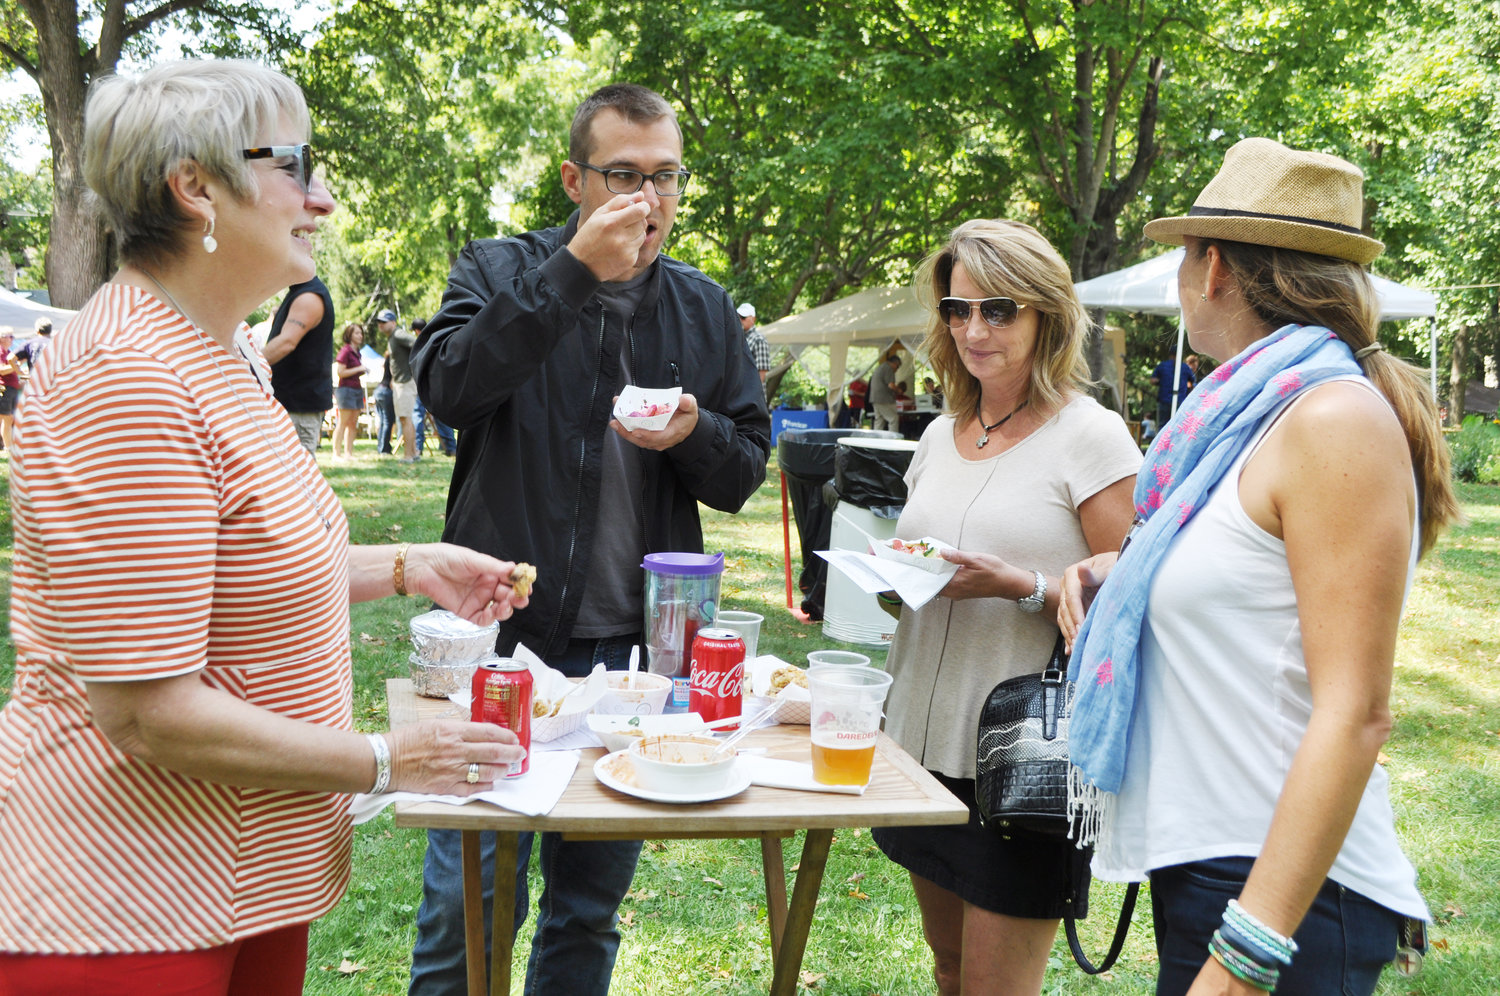 Rees Olander, left, visits with family members Emerson Olander, Sara Olander and Megal Olander at Taste of Montgomery County on the grounds of the General Lew Wallace Study & Museum.